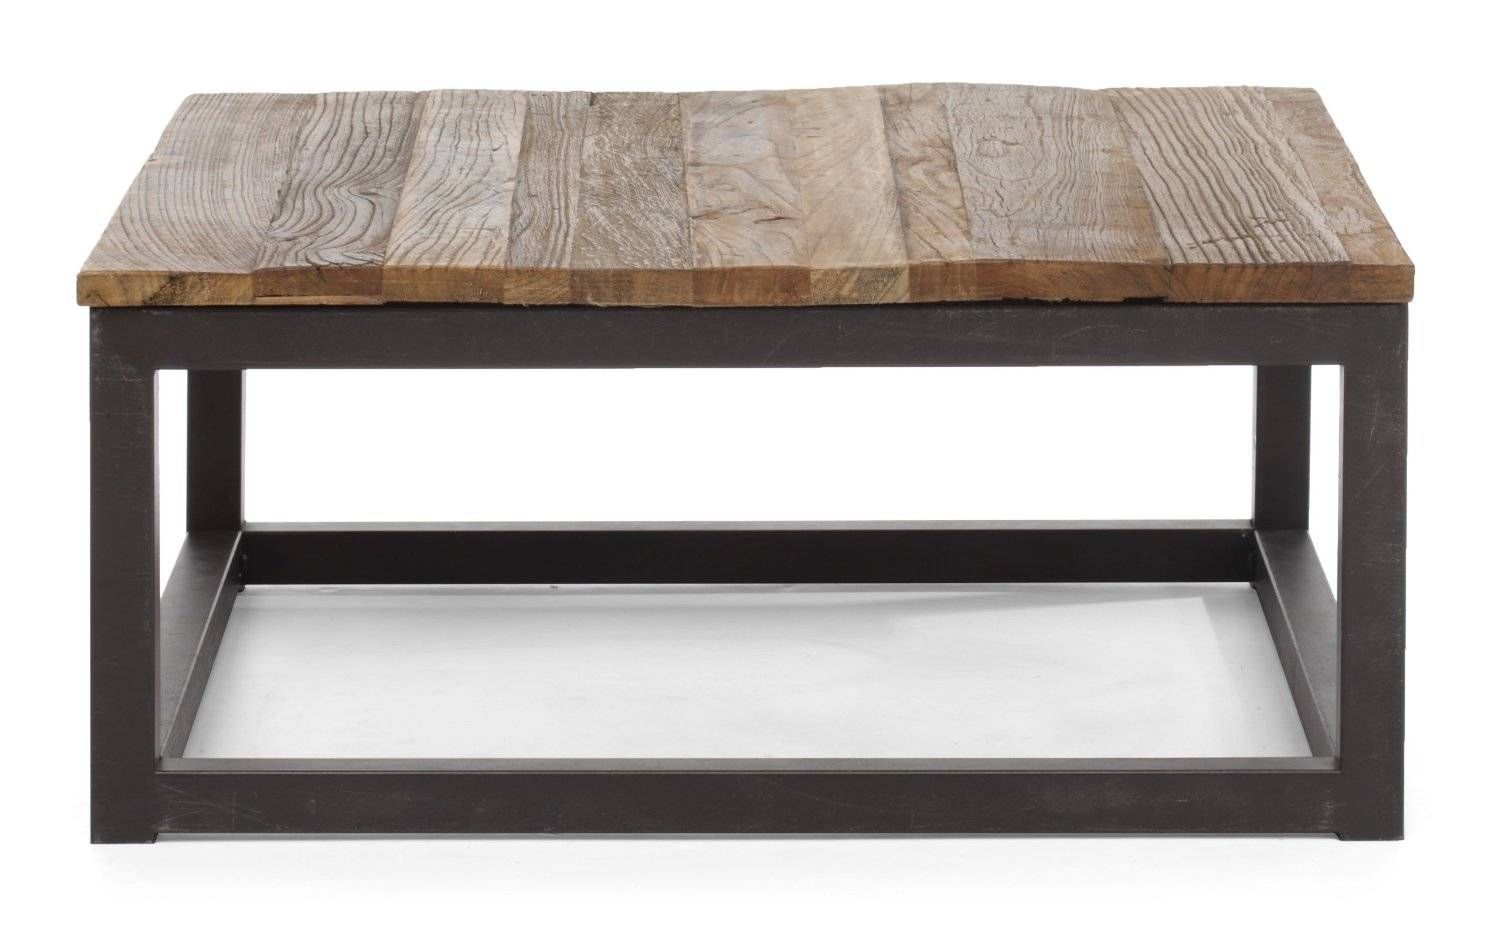 Distressed Dark Wood Coffee Table | Idi Design Pertaining To Dark Wood Square Coffee Tables (View 24 of 30)